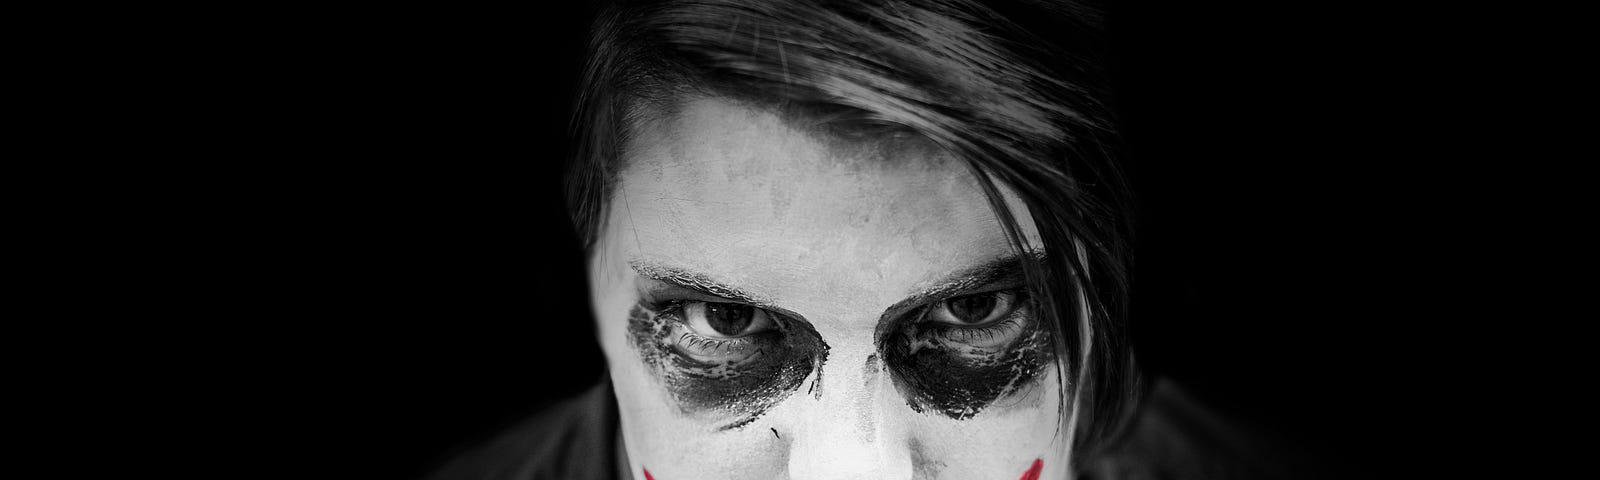 Very ugly clown. Black and white photo, but the clown smile is bright red. Makeup very poorly done.